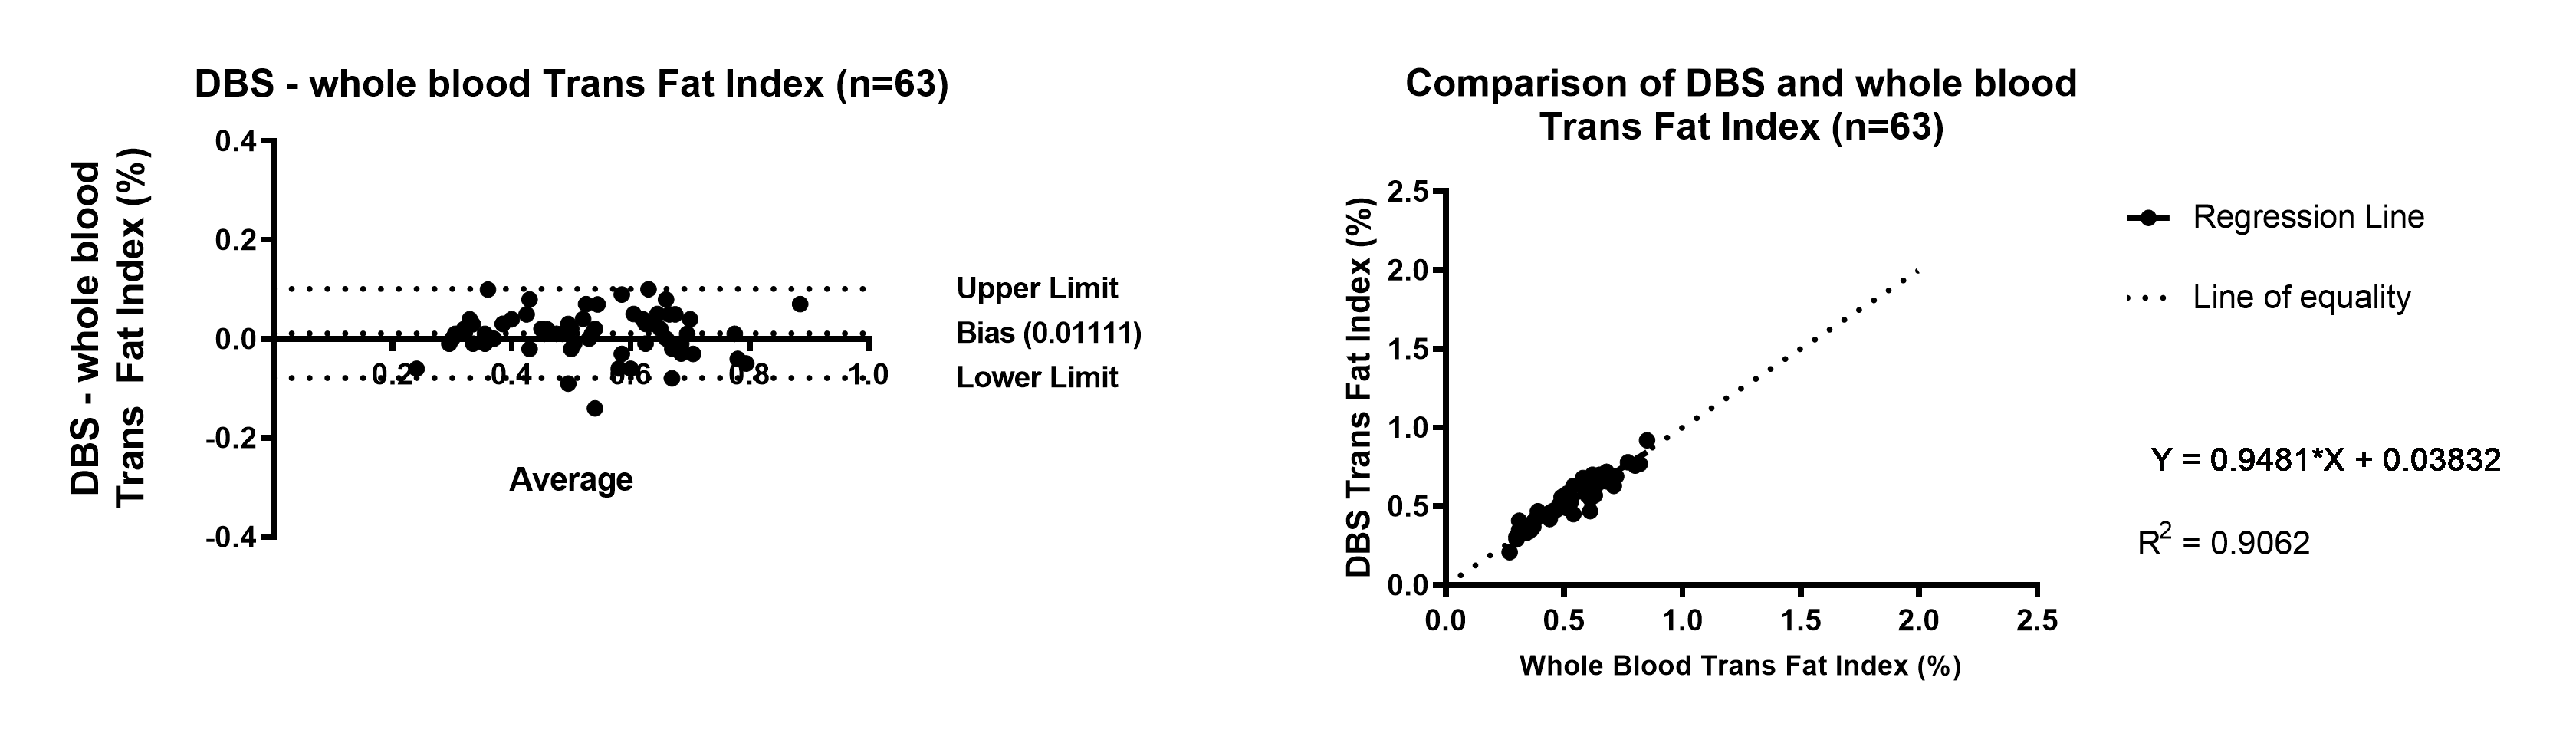 Graph showing Trans Fat Index Bland Altman and Linear Regression of DBS compared to whole blood